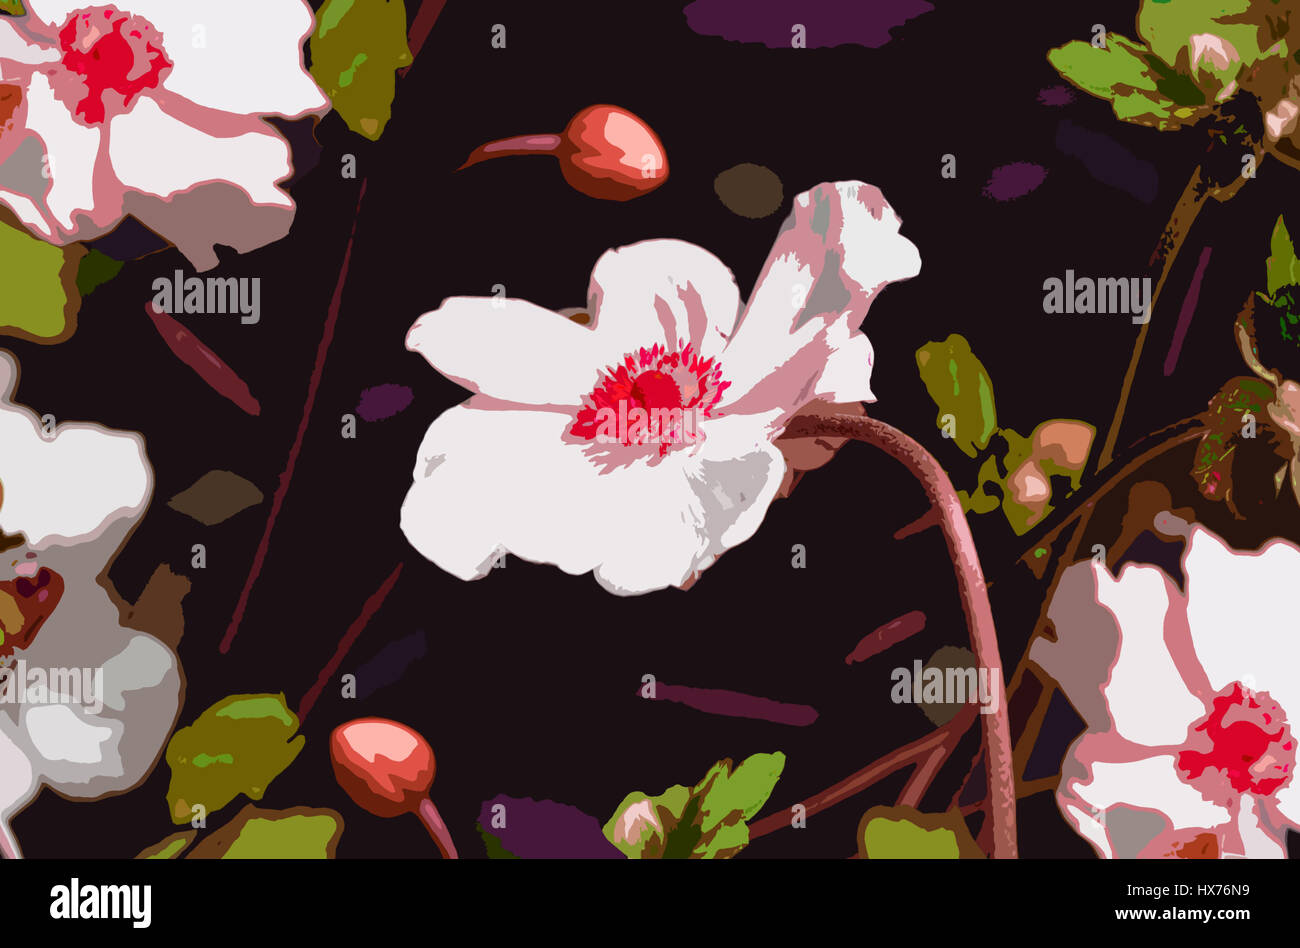 Pop-art style illustration of Anemone flowers and buds on rich background Stock Photo